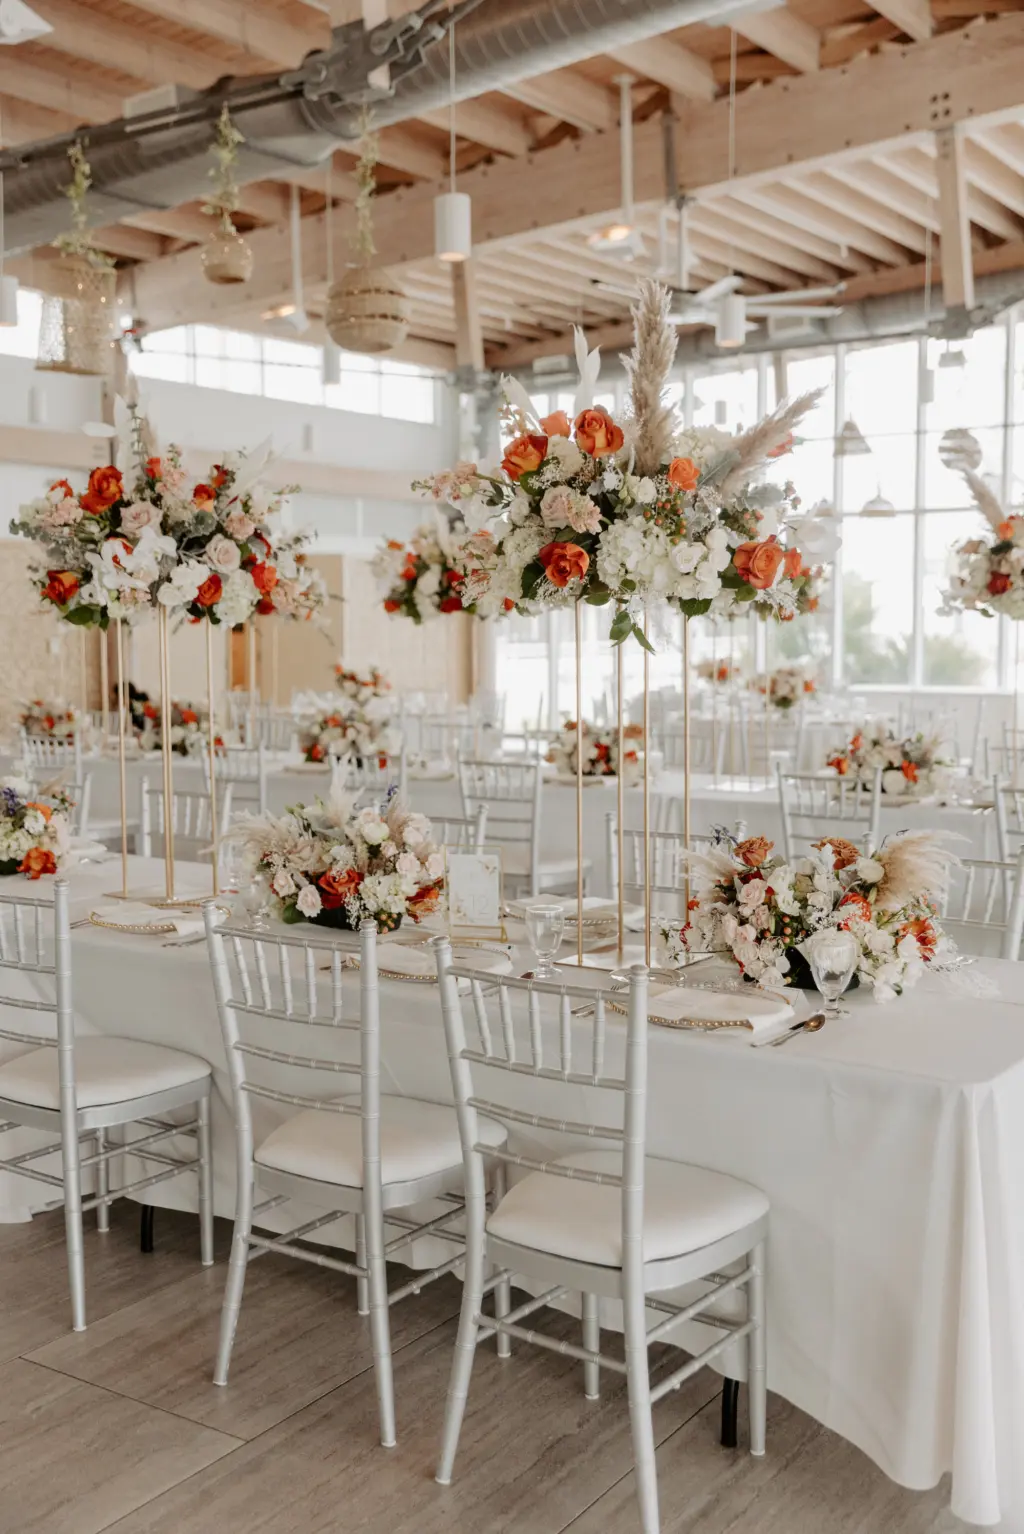 Tall Flower Stand Wedding Reception Centerpiece Ideas with Pampas Grass, Orange, Pink, and White Roses, Carnations, Hydrangeas, and Dried Florals